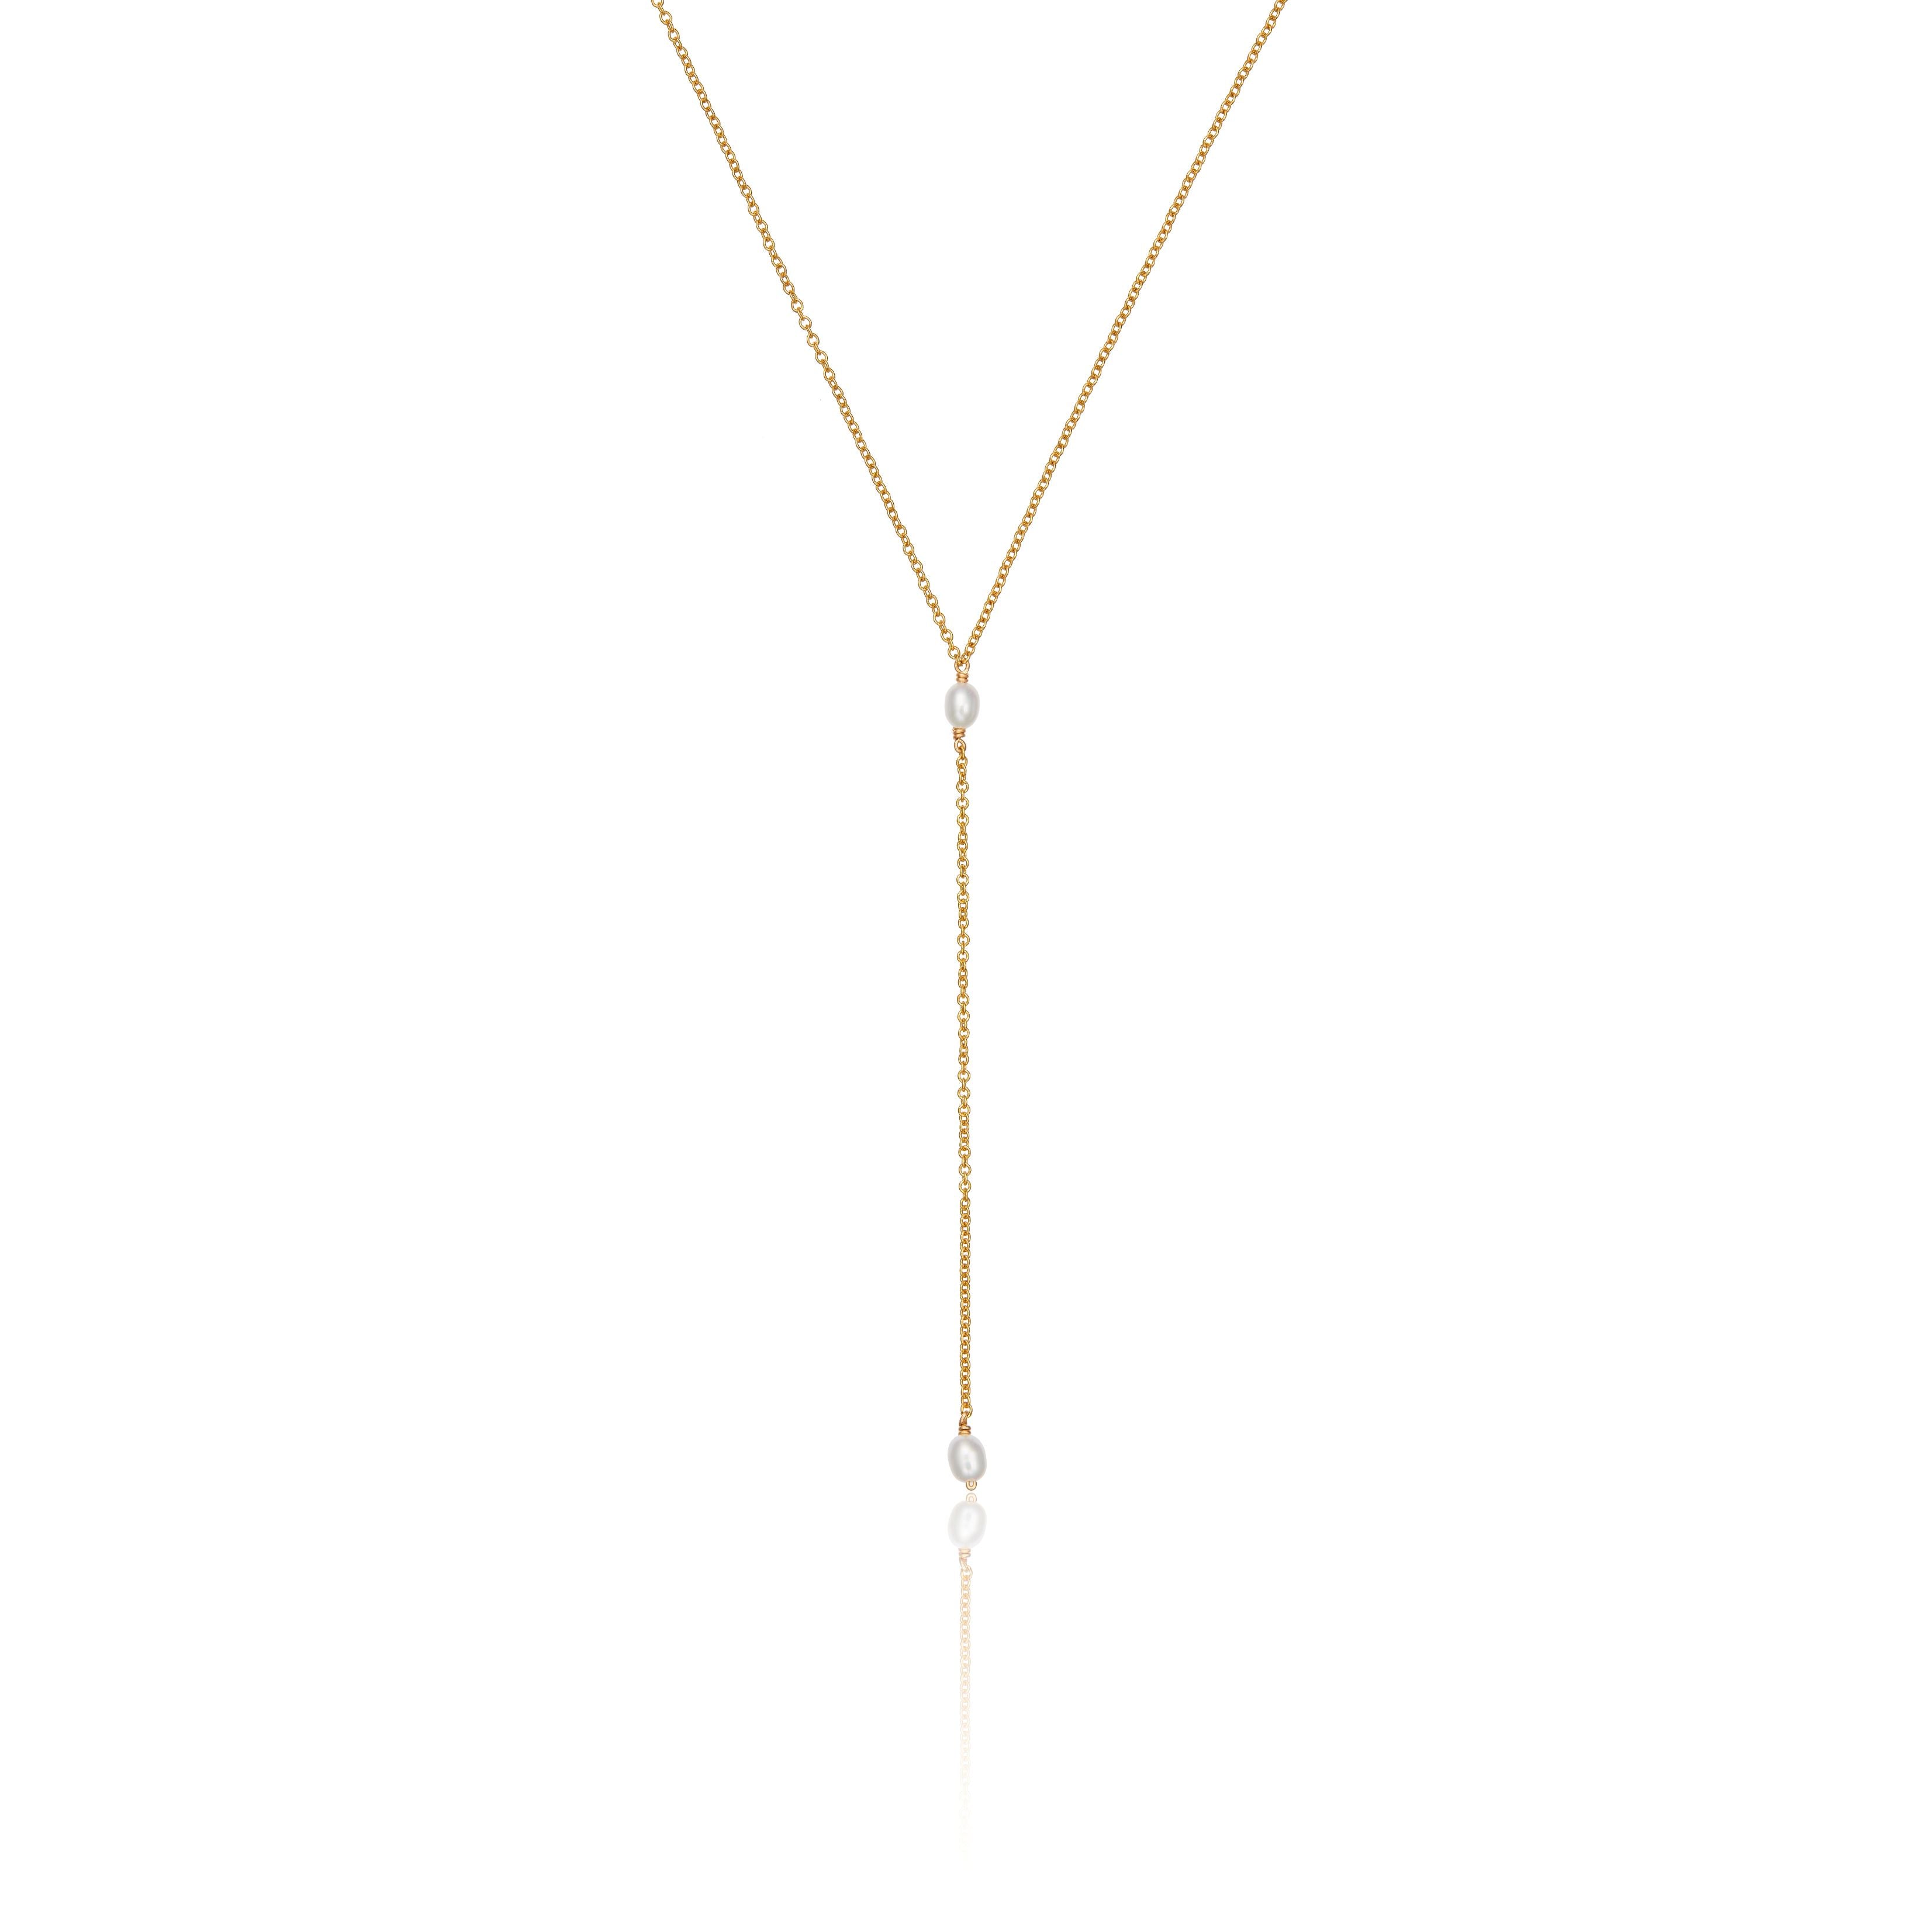 Gold double seed pearl lariat necklace on a white background